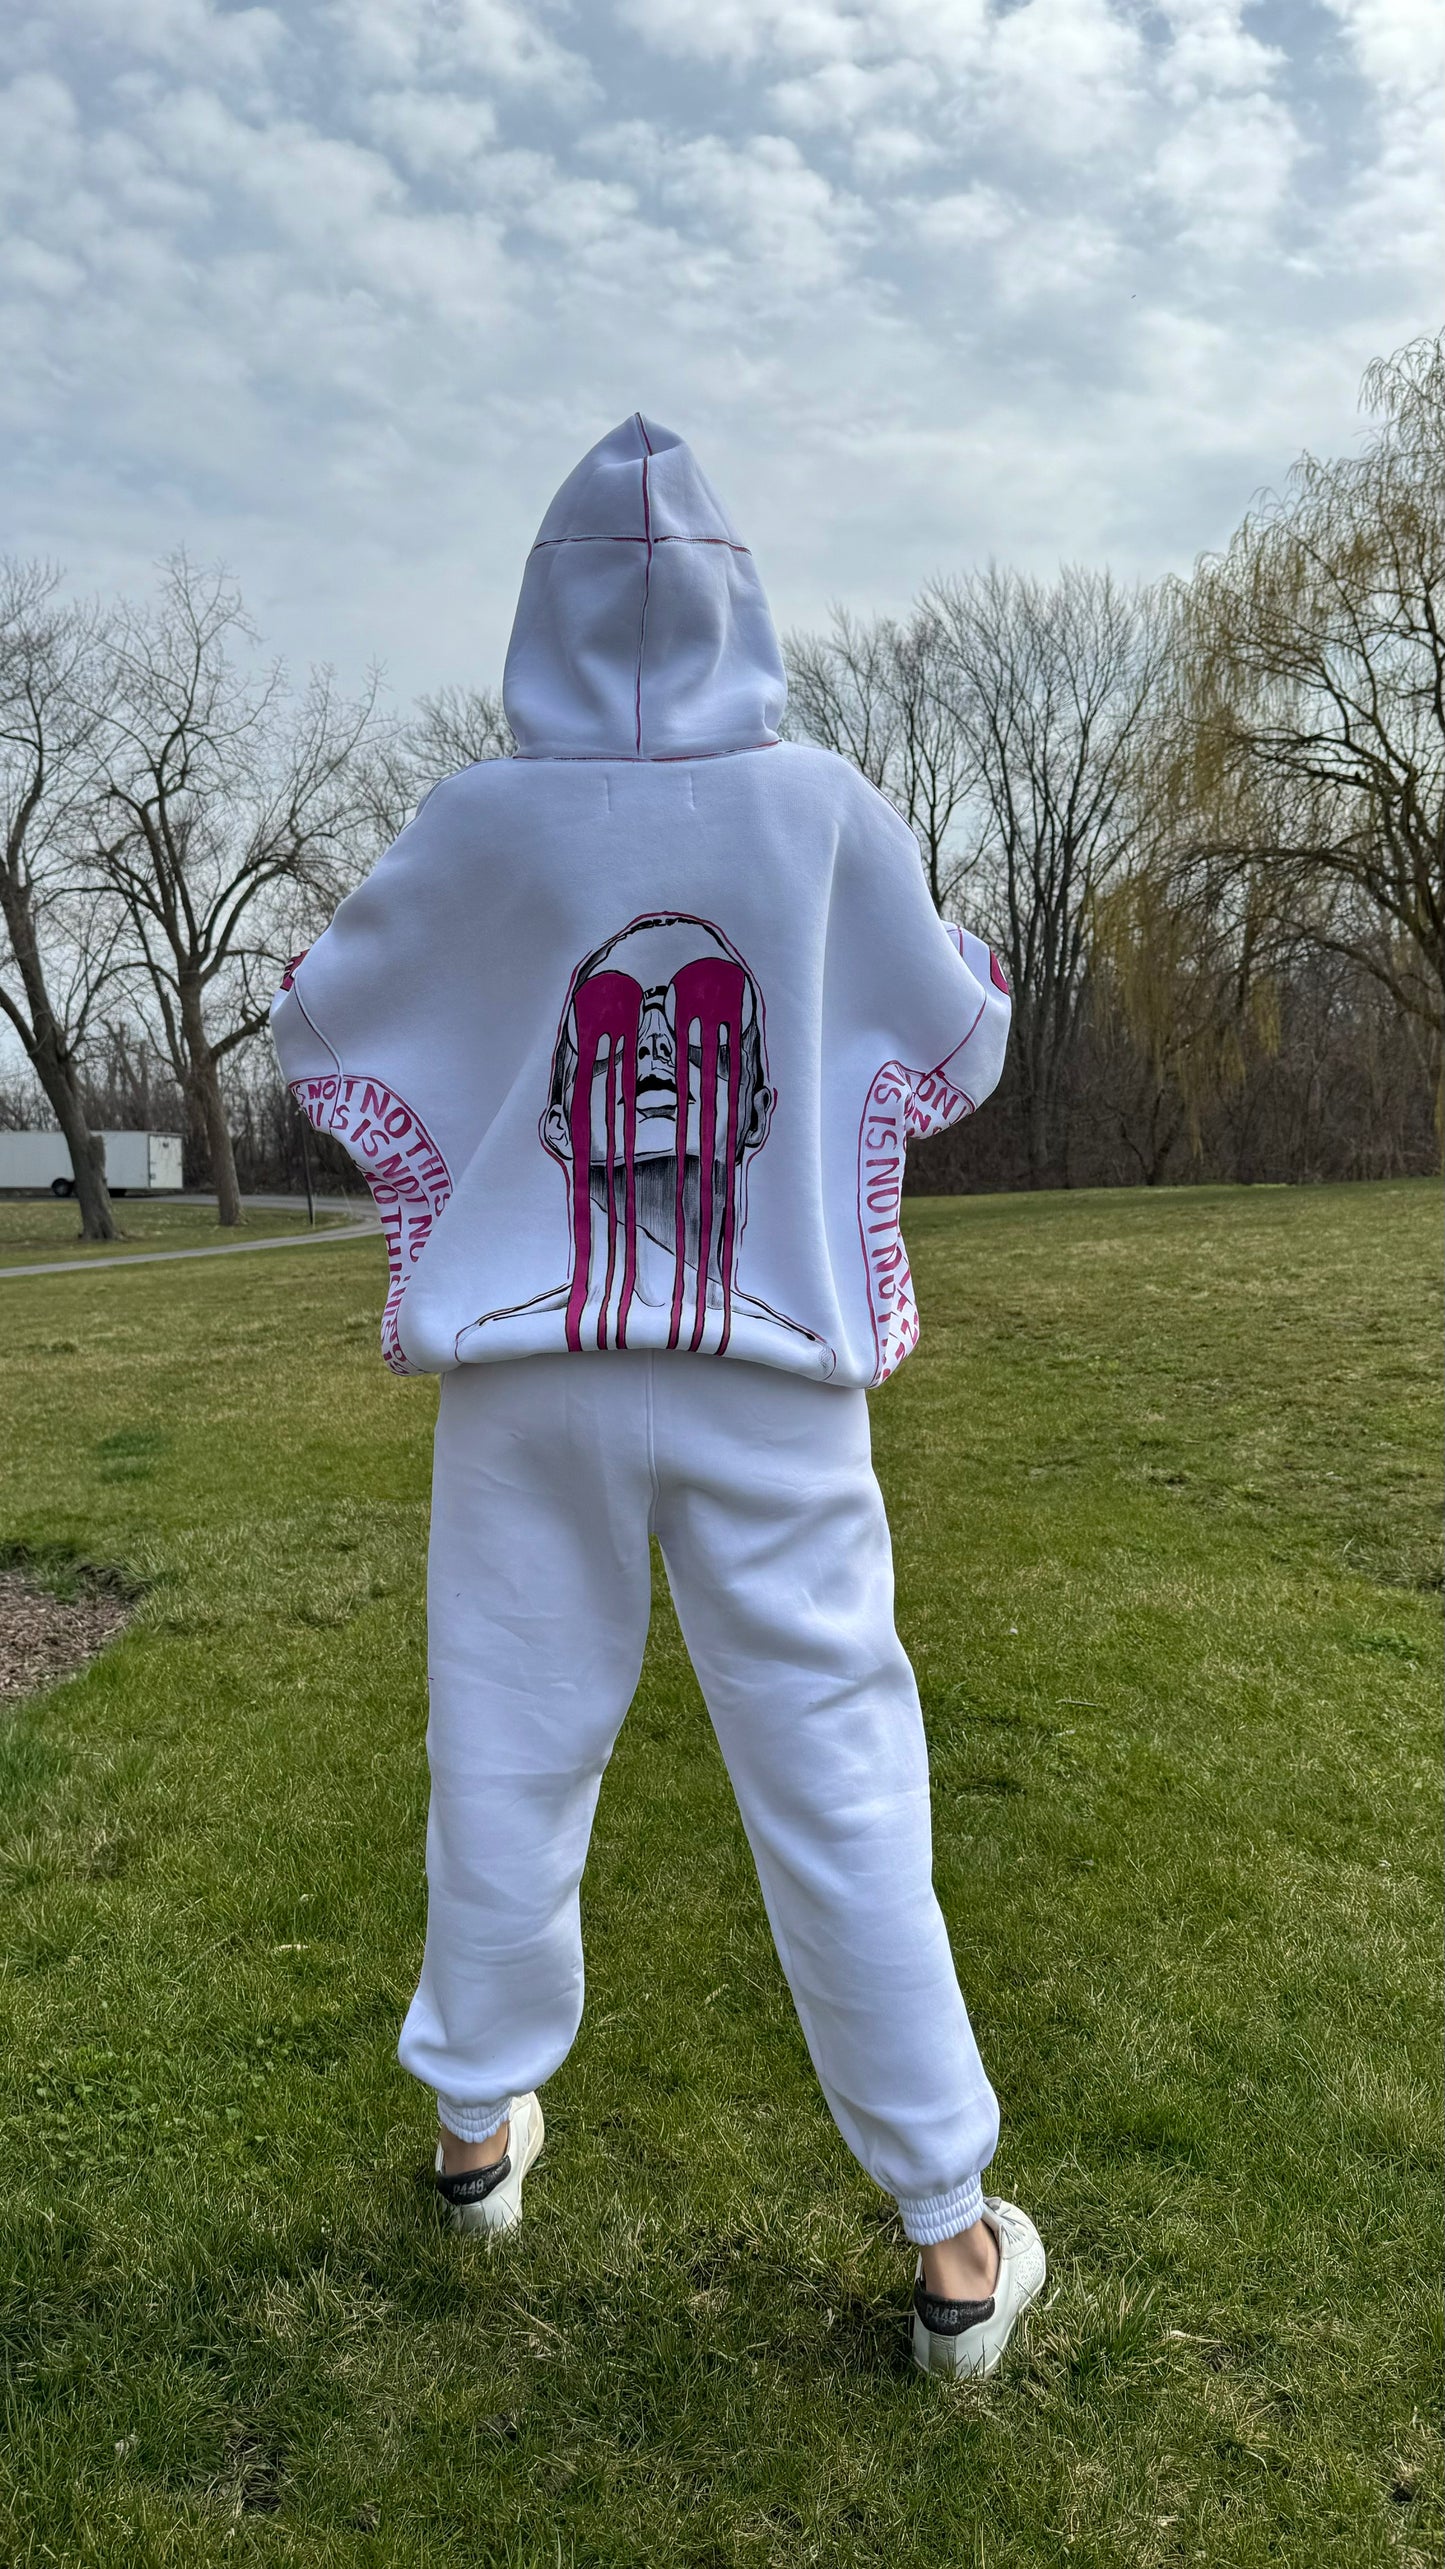 HAND PAINTED TRACK SUIT "NO THIS IS NOT D1OR"